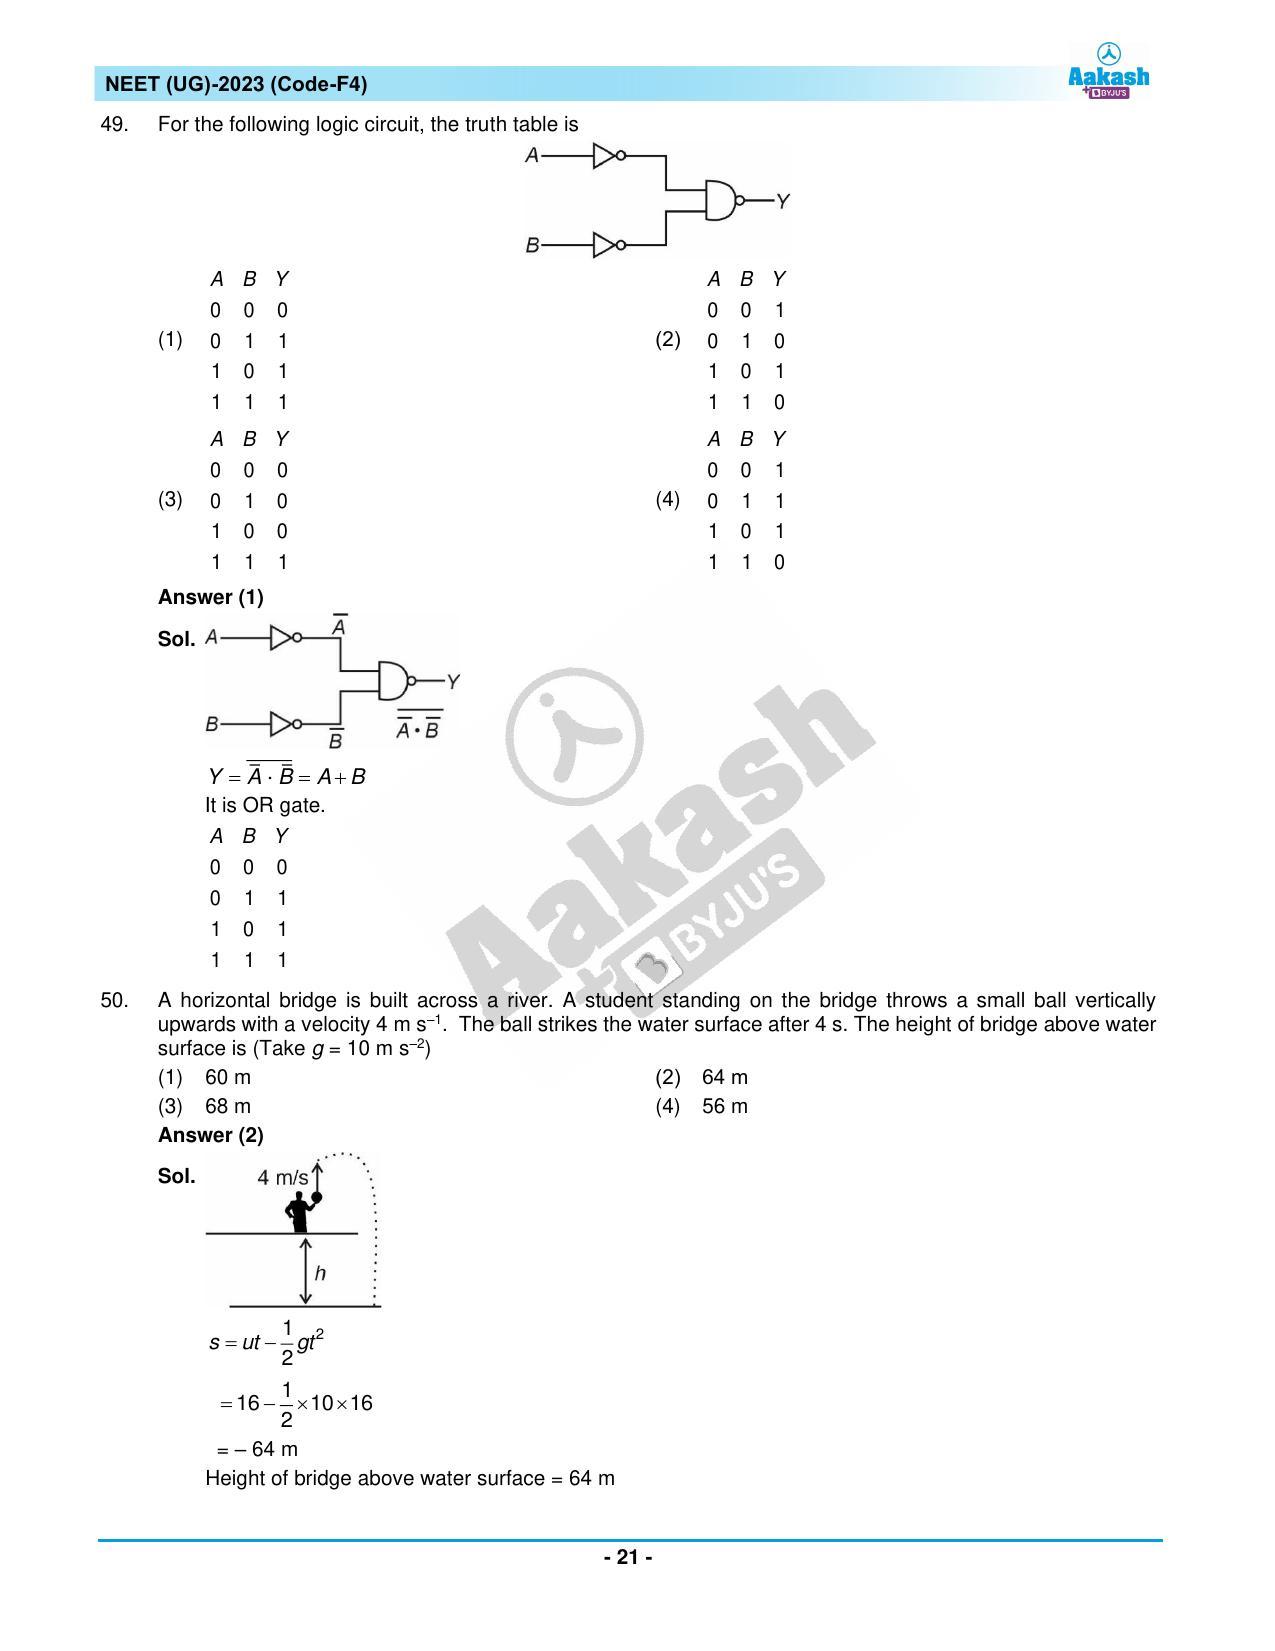 NEET 2023 Question Paper F4 - Page 21